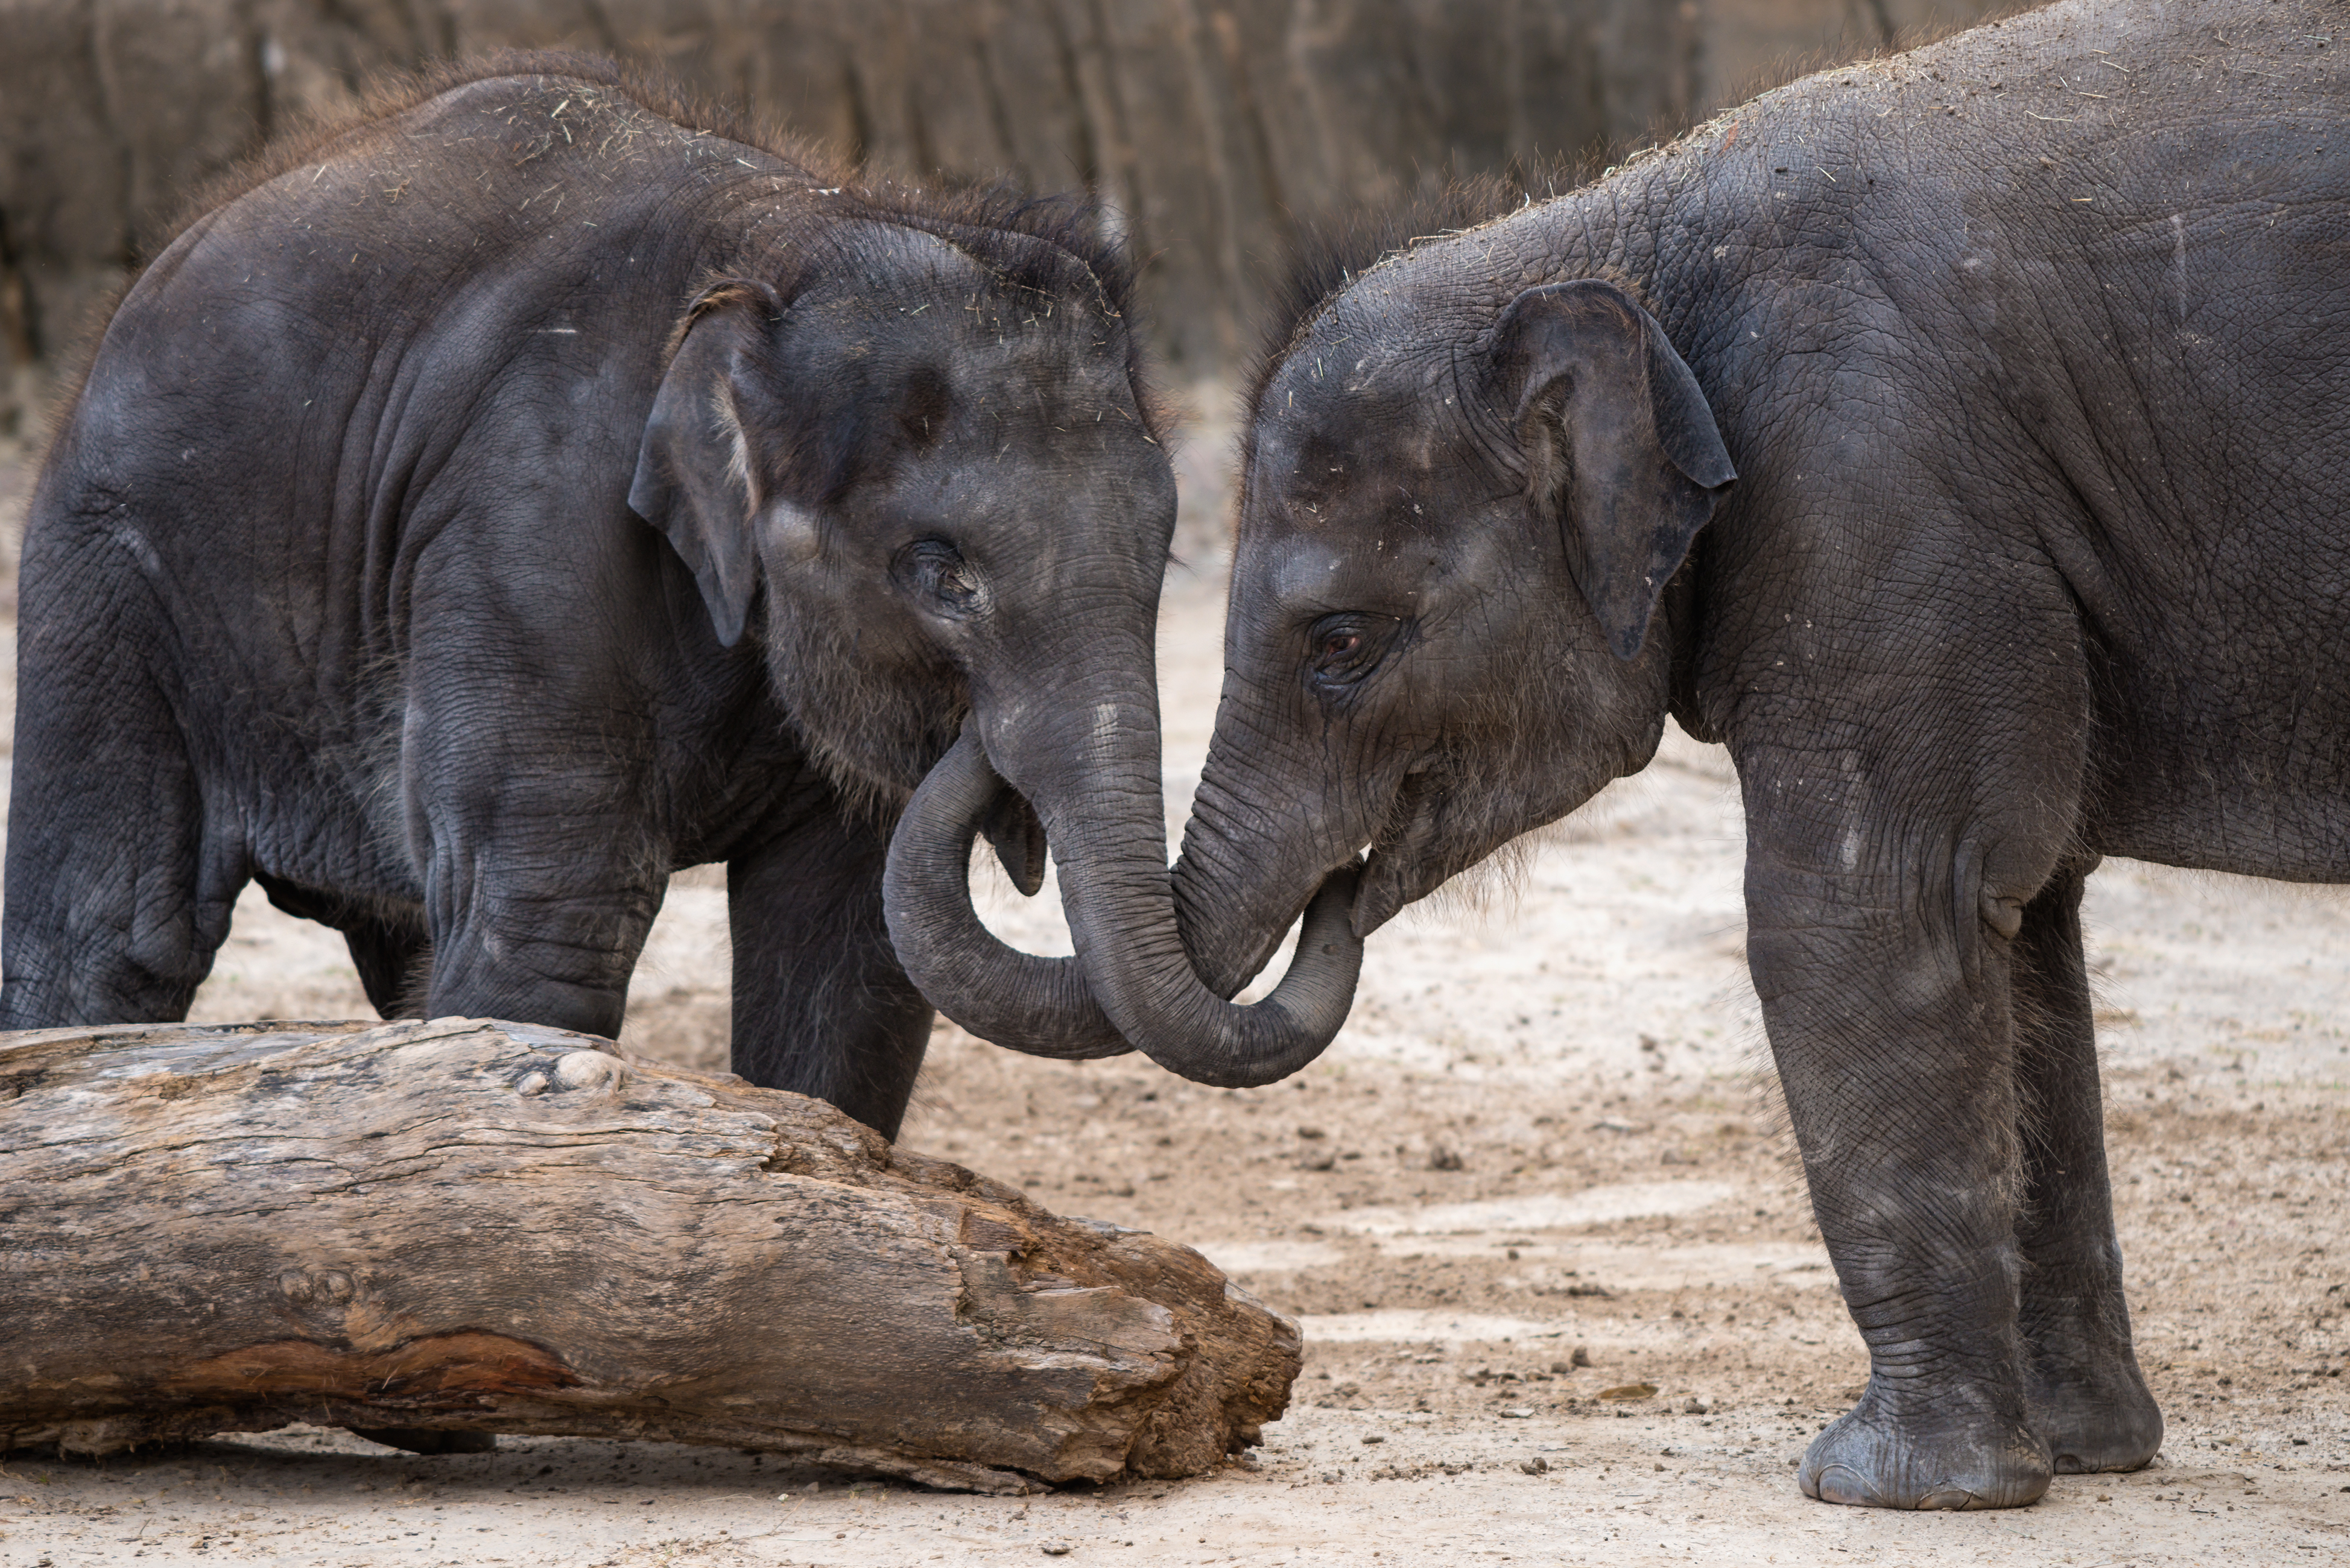 New at the Zoo - Asian elephant